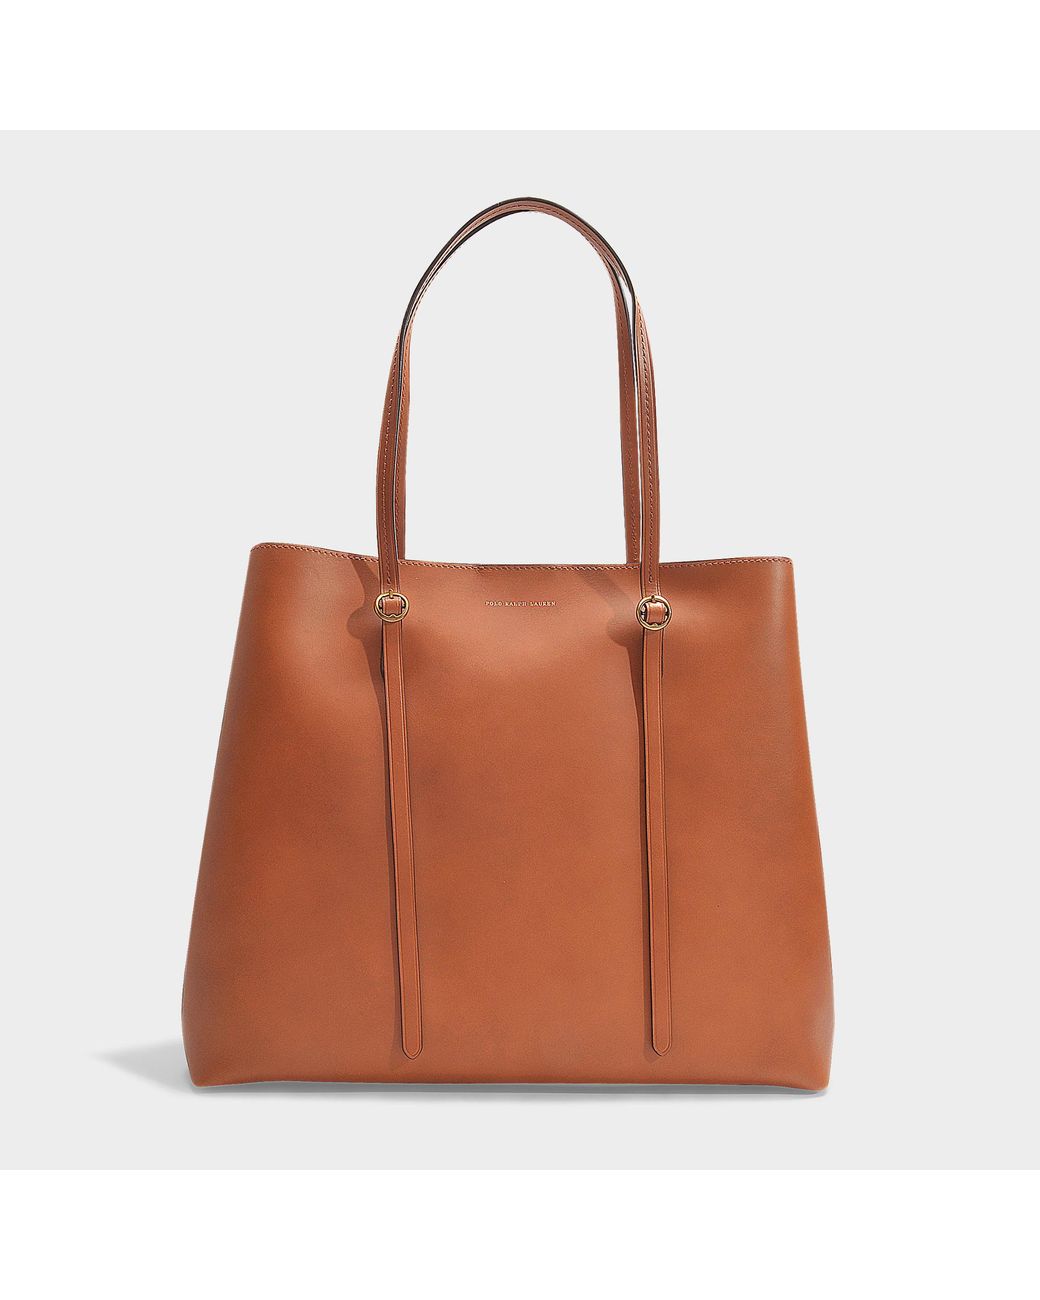 Polo Ralph Lauren Lennox Large Tote In Saddle Smooth Leather in Brown | Lyst